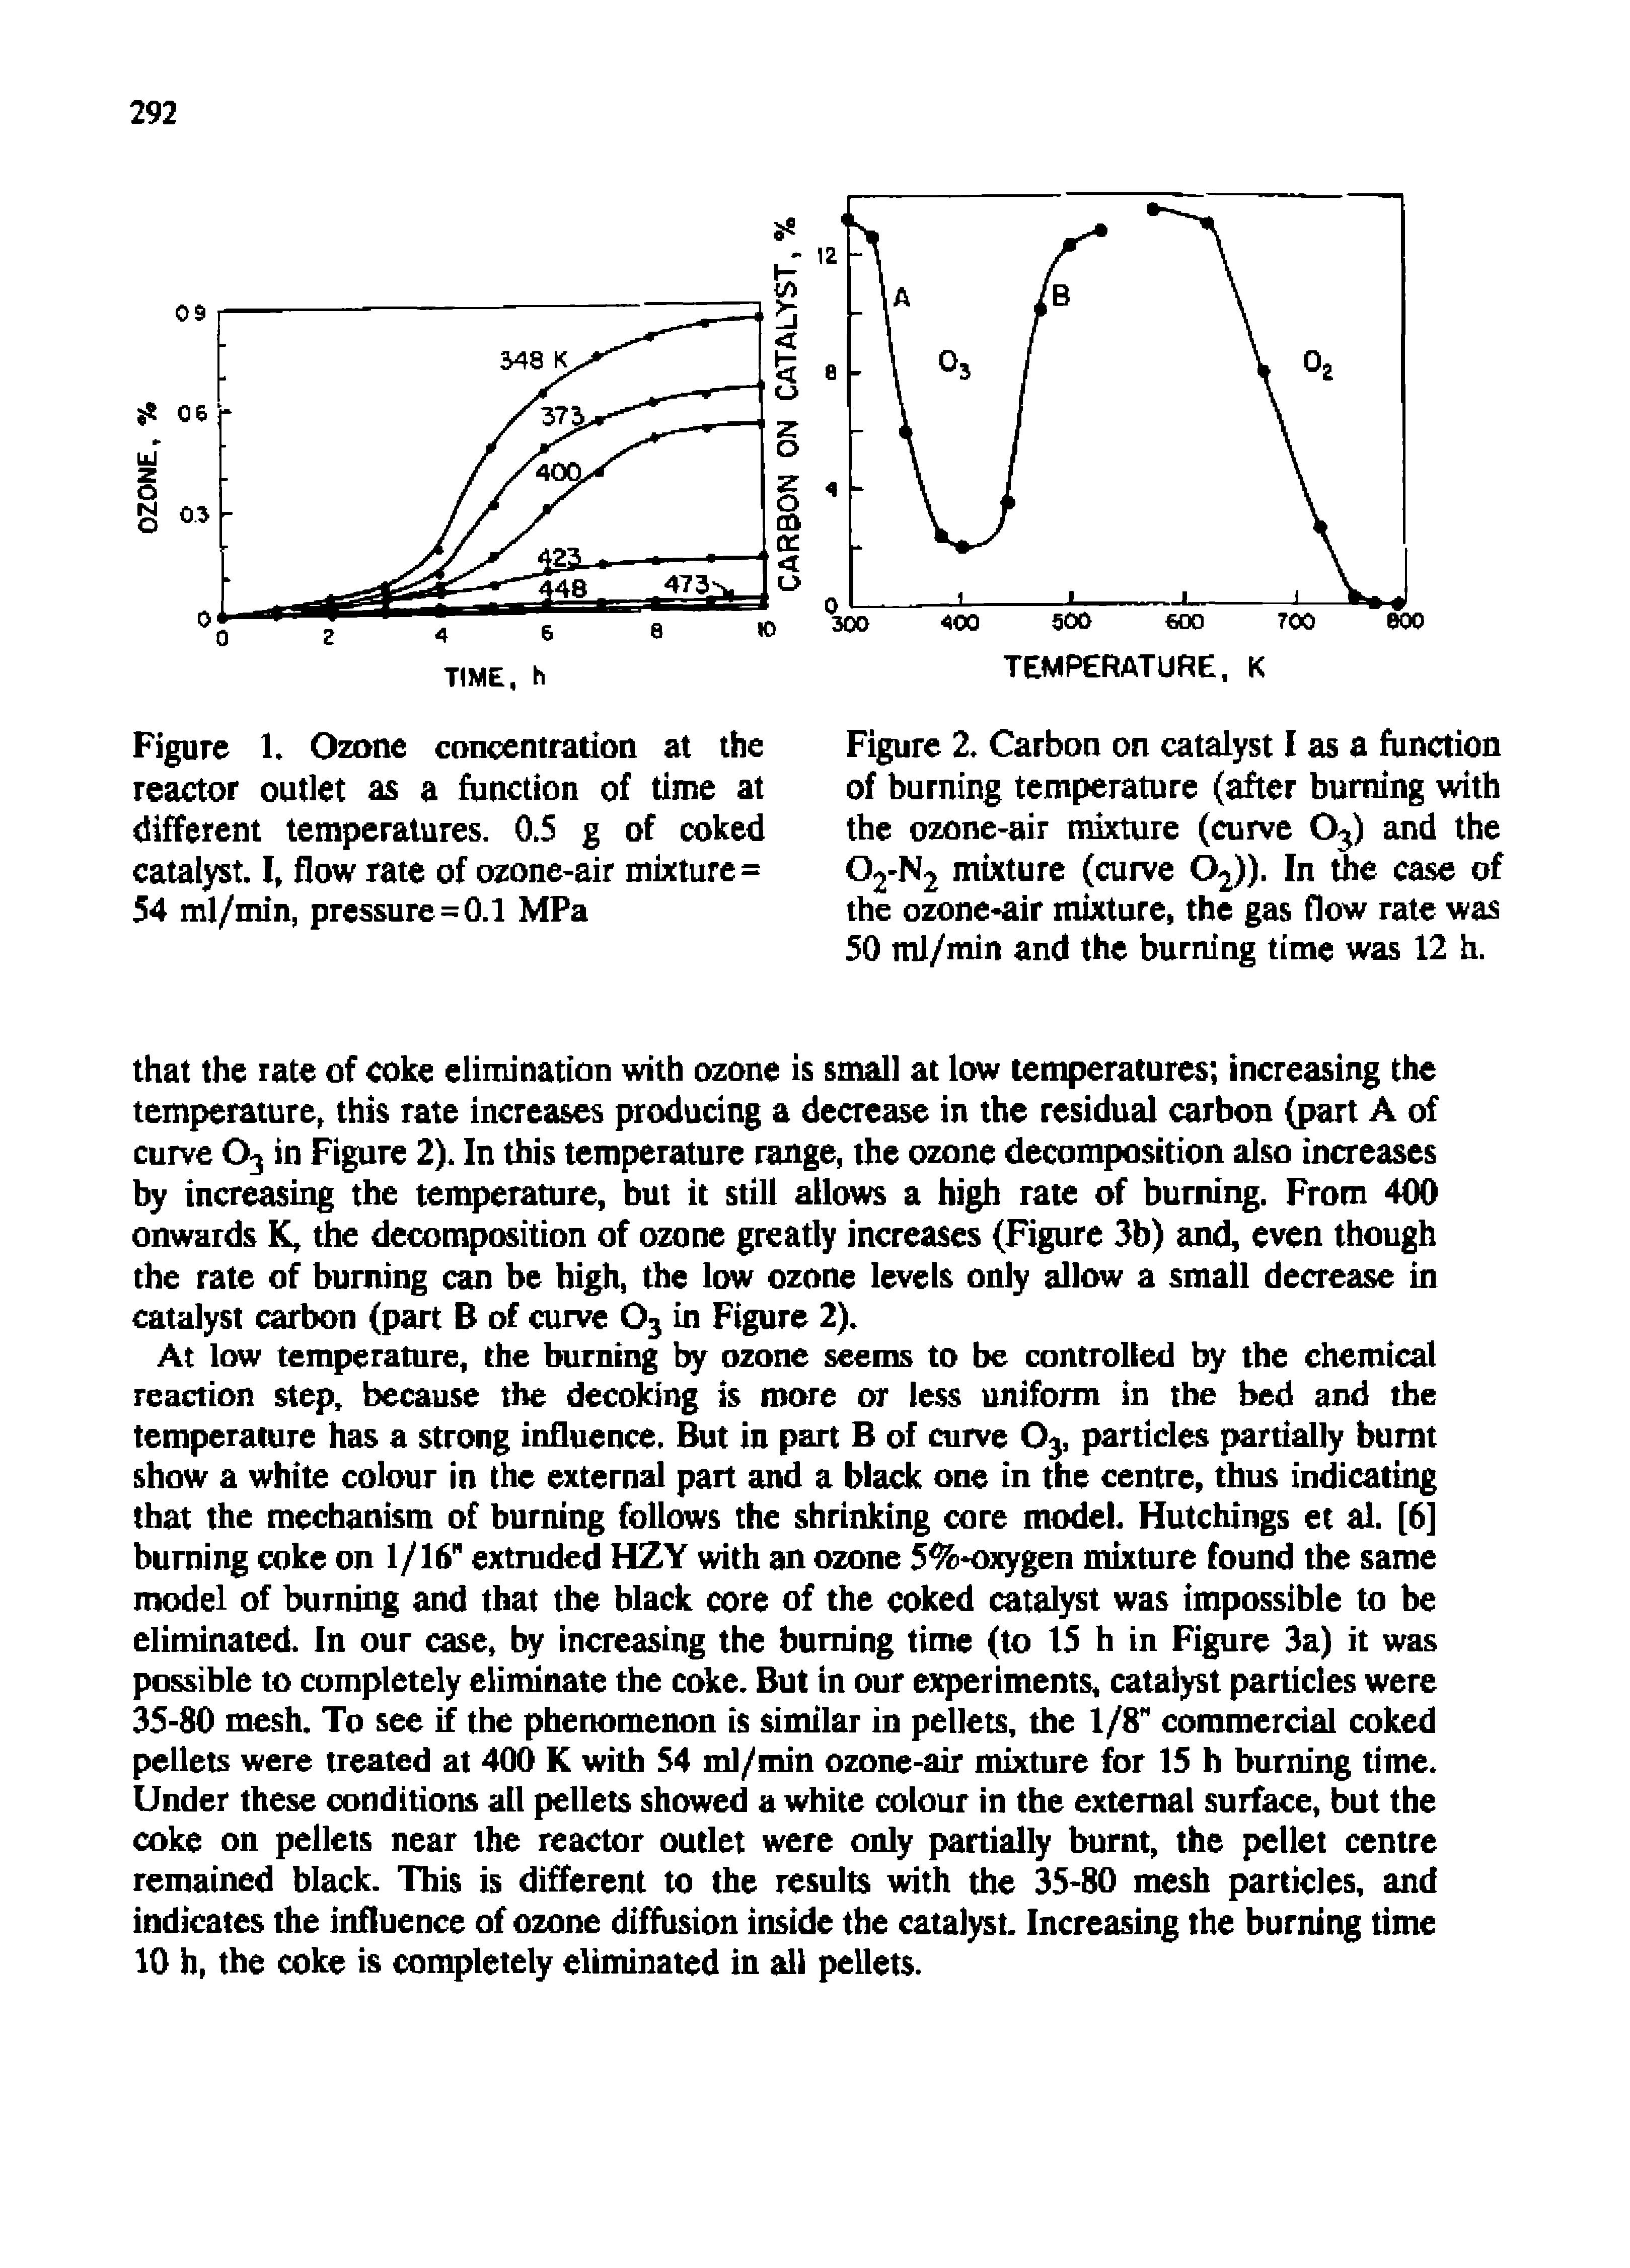 Figure 2. Carbon on catalyst I as a function of burning temperature (after burning with the ozone-air mixture (curve O3) and the 02-N2 mixture (curve 02)). In the case of the ozone-air mixture, the gas flow rate was 50 ml/min and the burning time was 12 h.